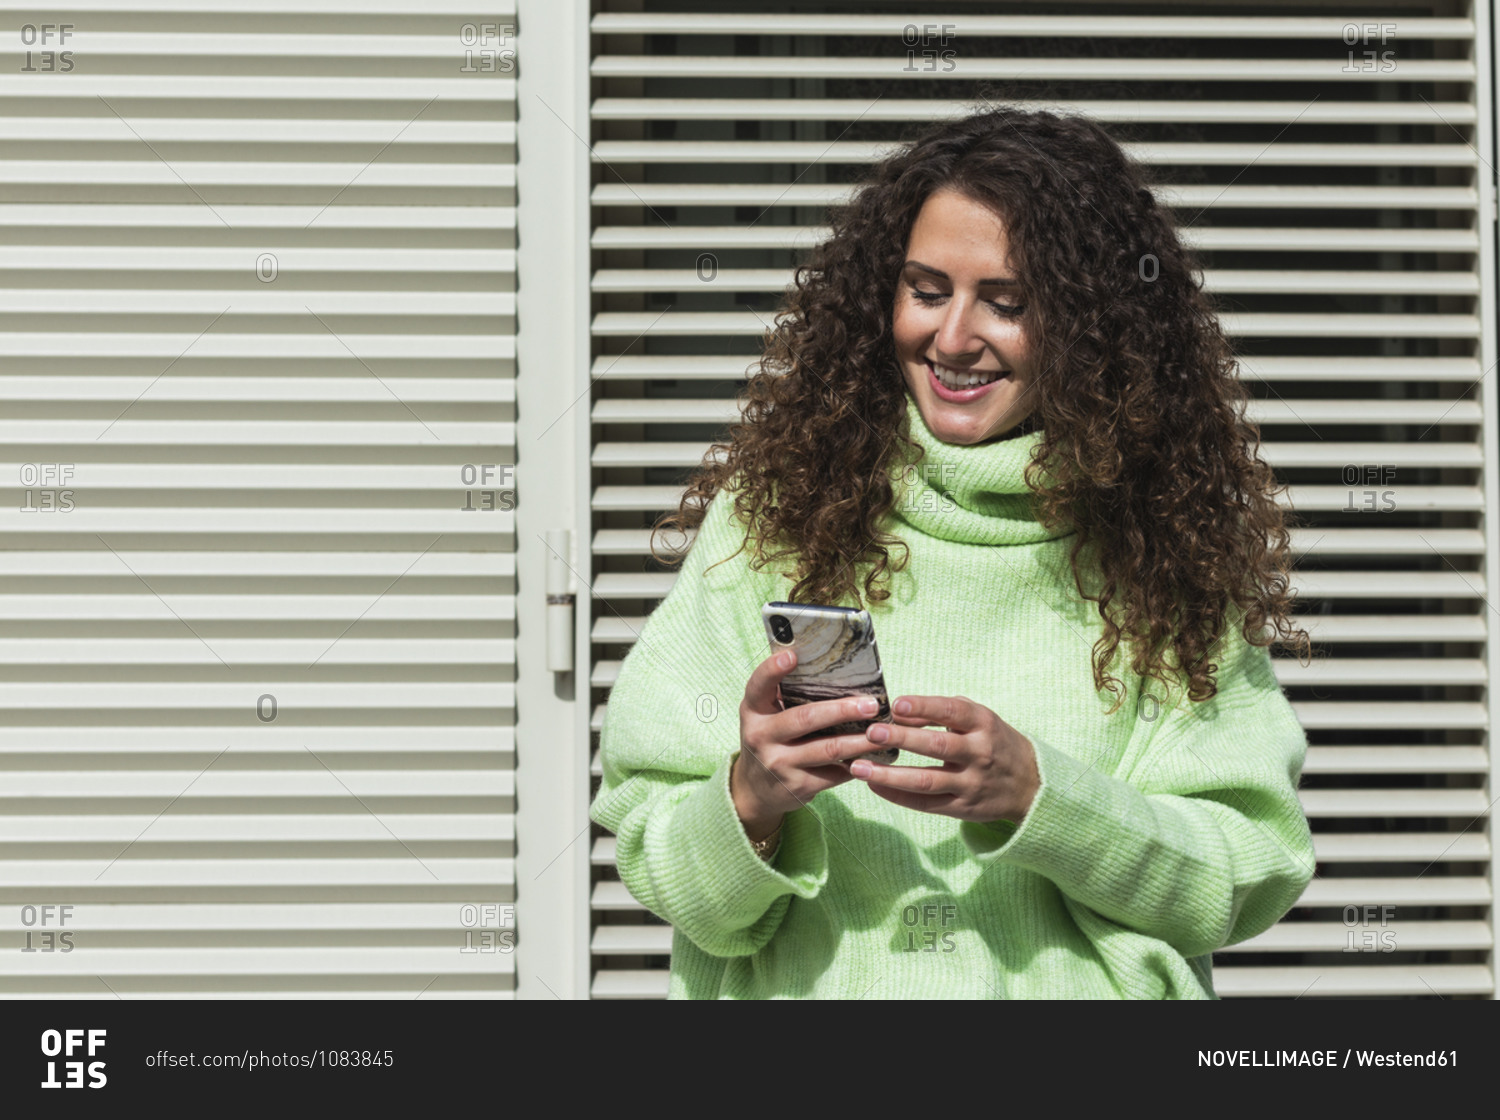 Smiling woman in neon green sweater using mobile phone against metallic door on sunny day